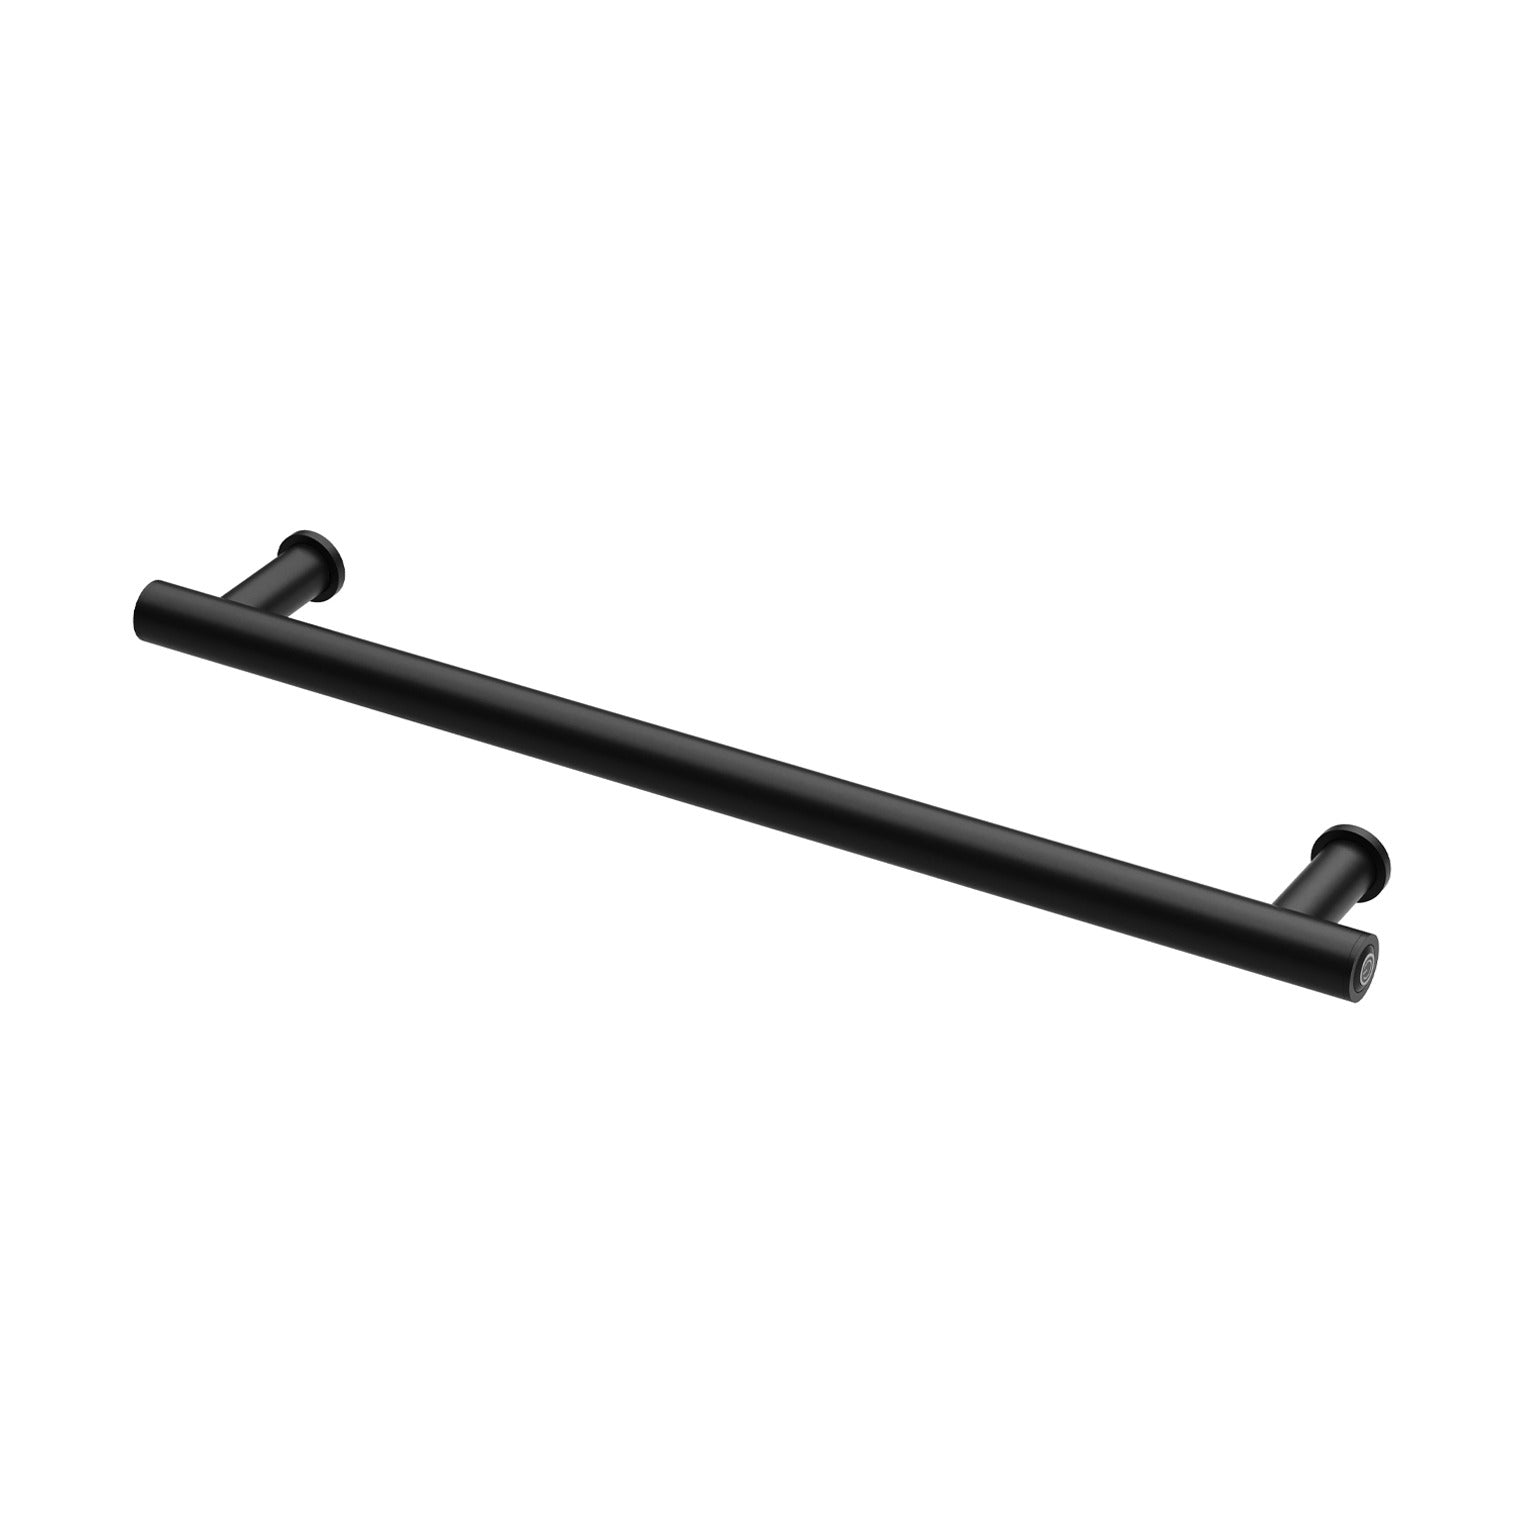 PHOENIX ROUND SINGLE HEATED TOWEL RAIL MATTE BLACK (AVAILABLE IN 600MM AND 800MM)